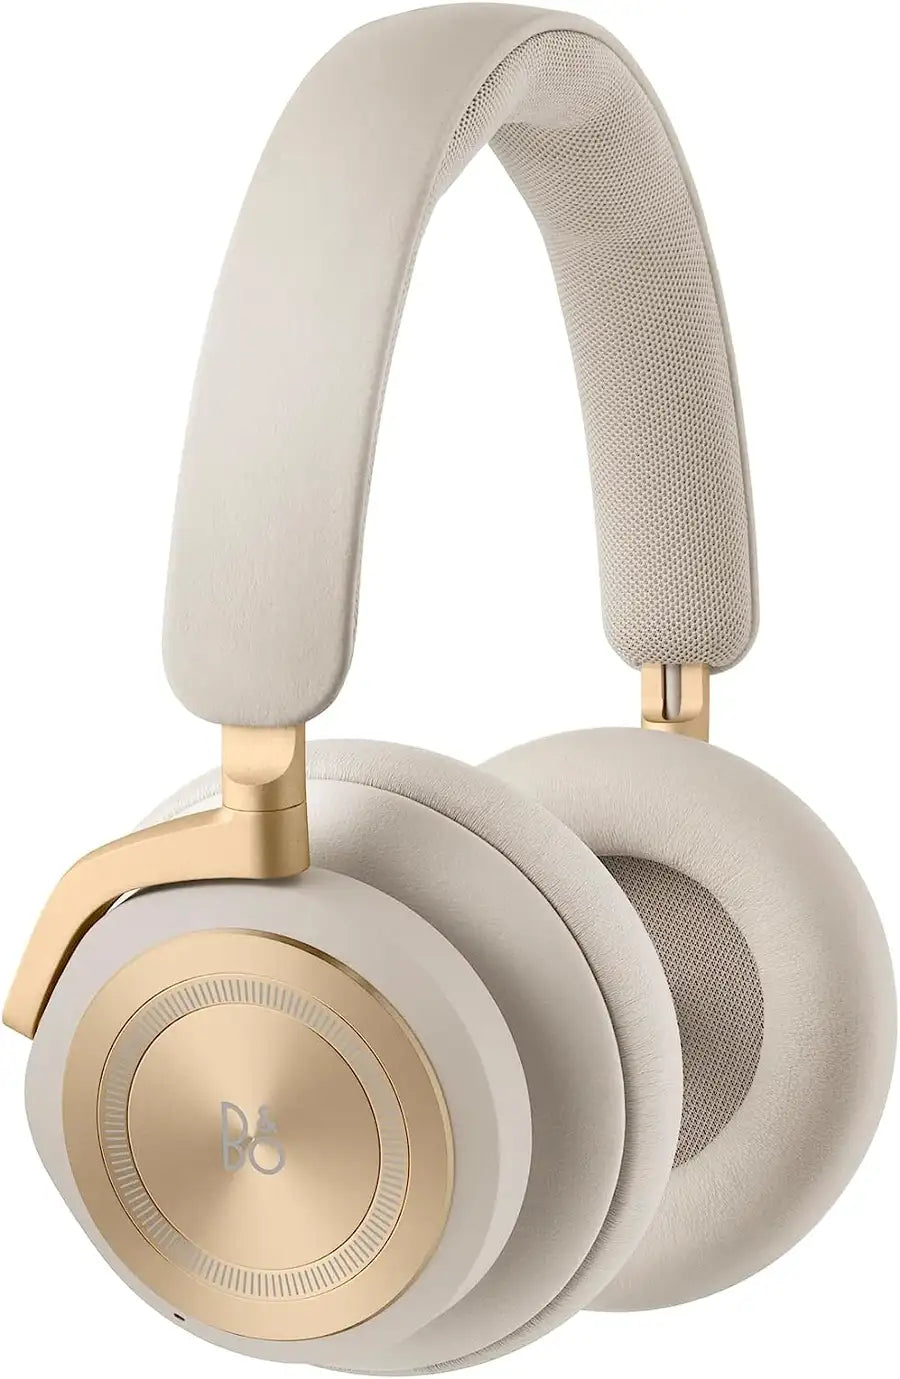 Bang & Olufsen Beoplay HX – Comfy Wireless ANC Over-Ear Headphones>Shop the best>Wireless Headphones from>Bang & Olufsen> just-$504.00> Shop now and save at>Future Tech Wear